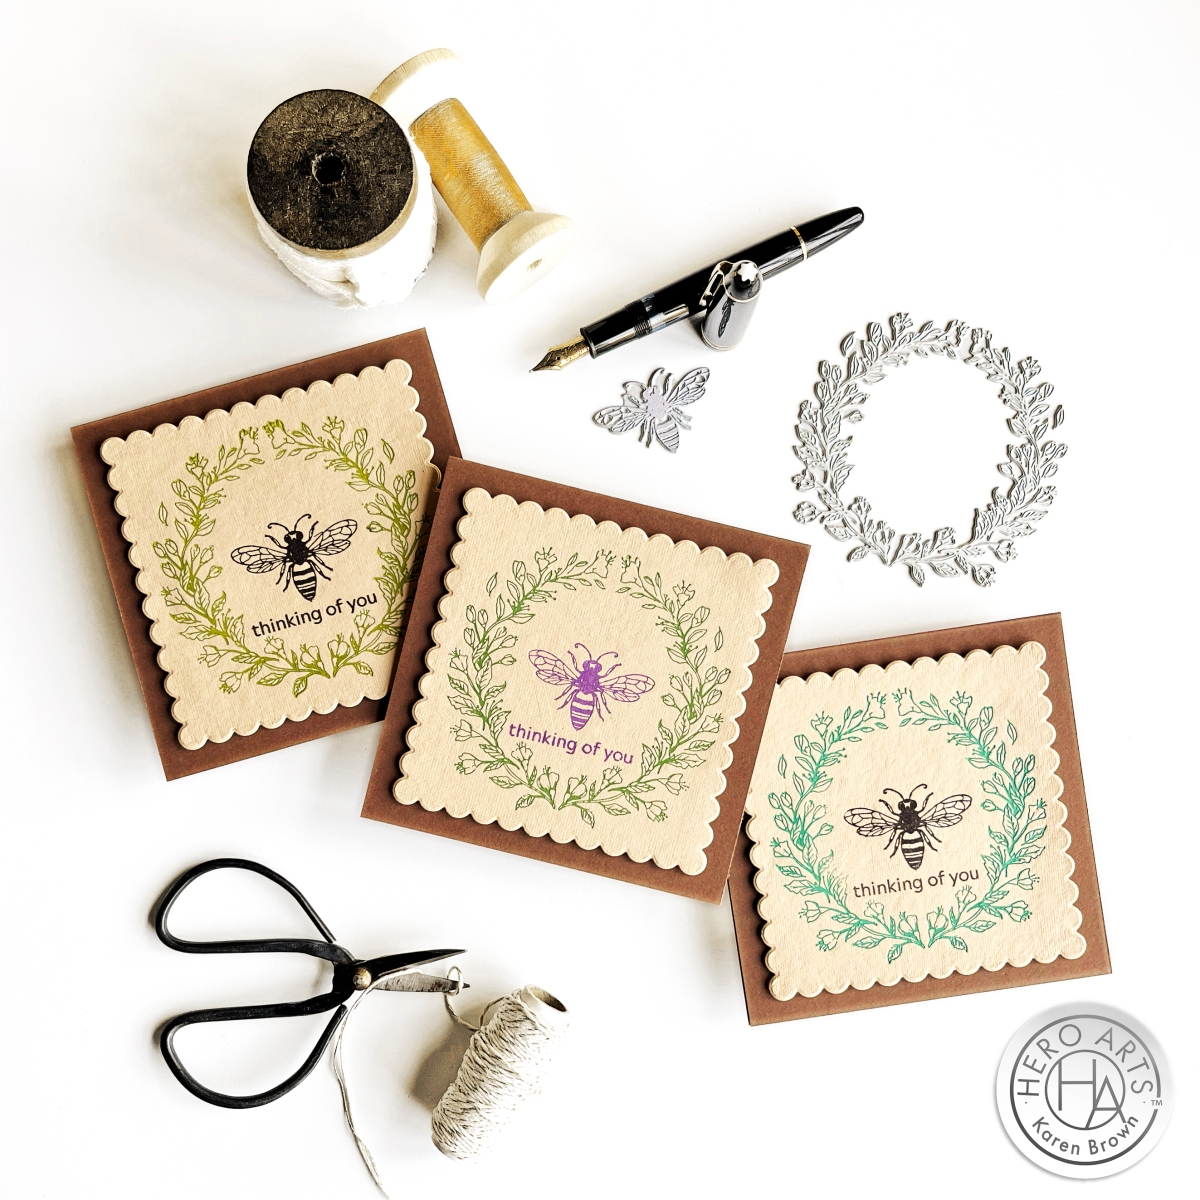 3 Square BetterPress letter press Sympathy Cards featuring Hero Arts Antique Bee and Wreath.